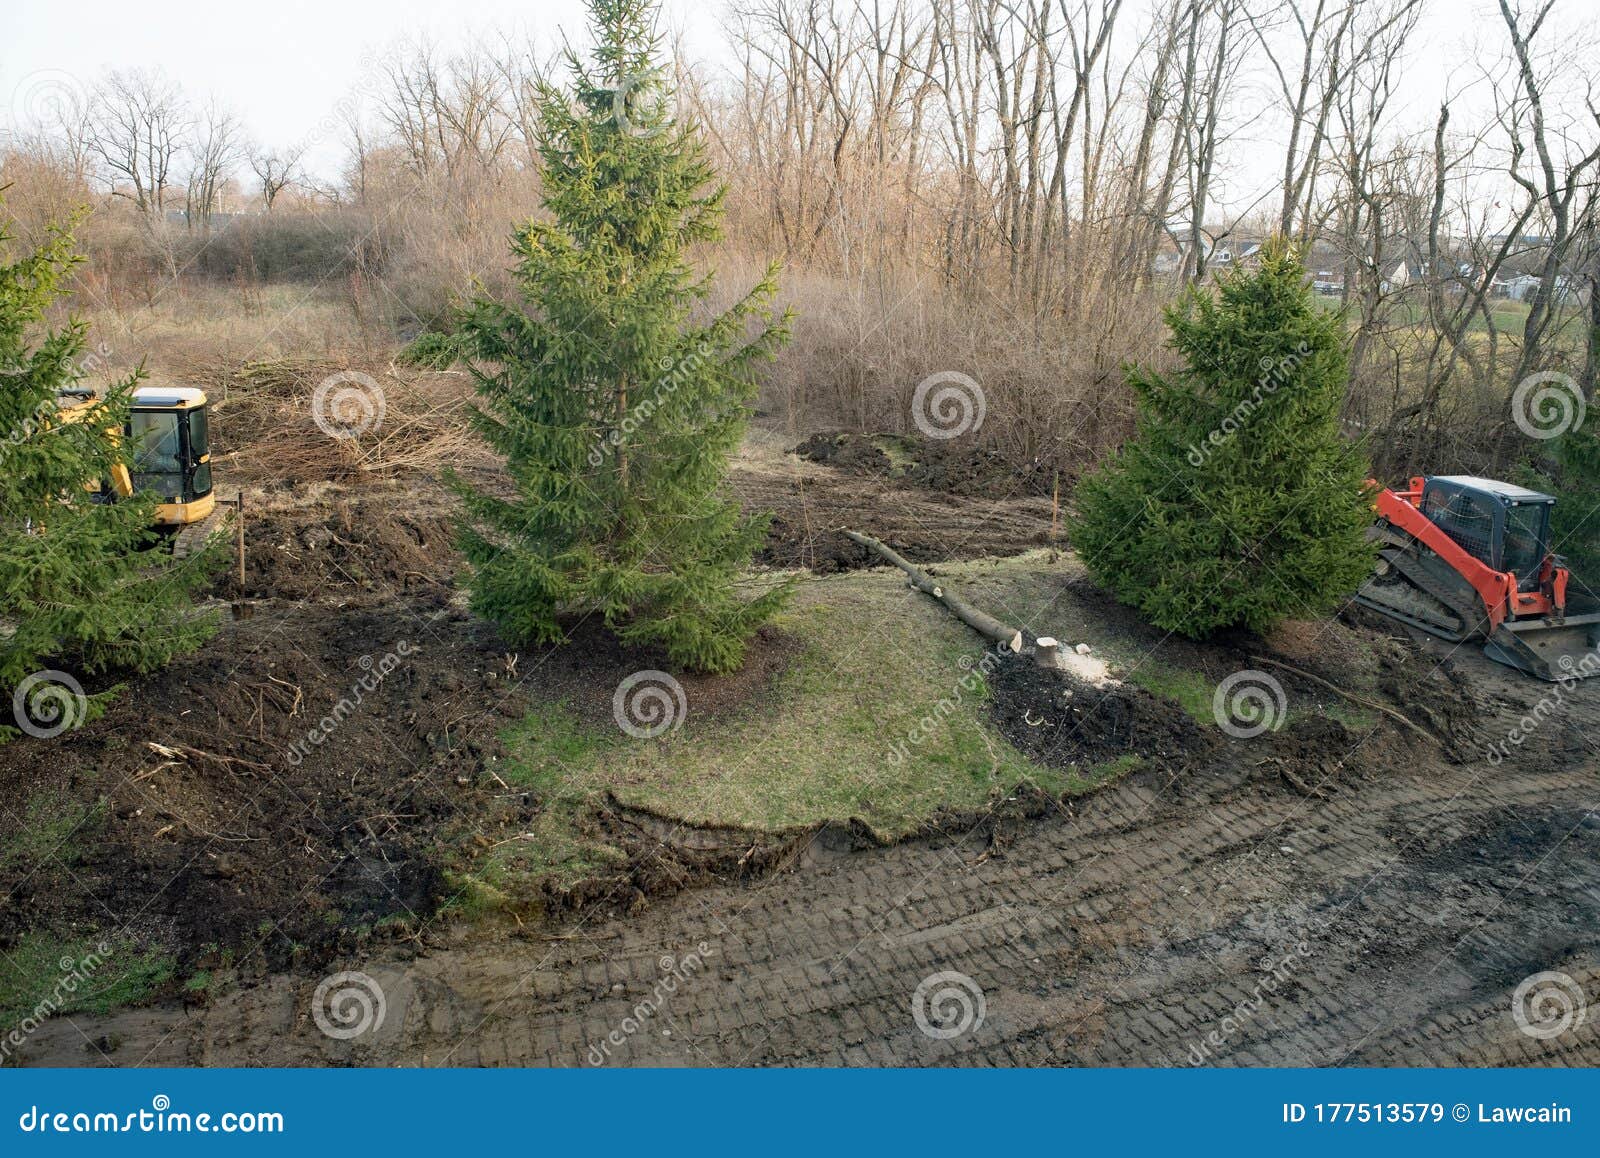 felling trees during land excavation